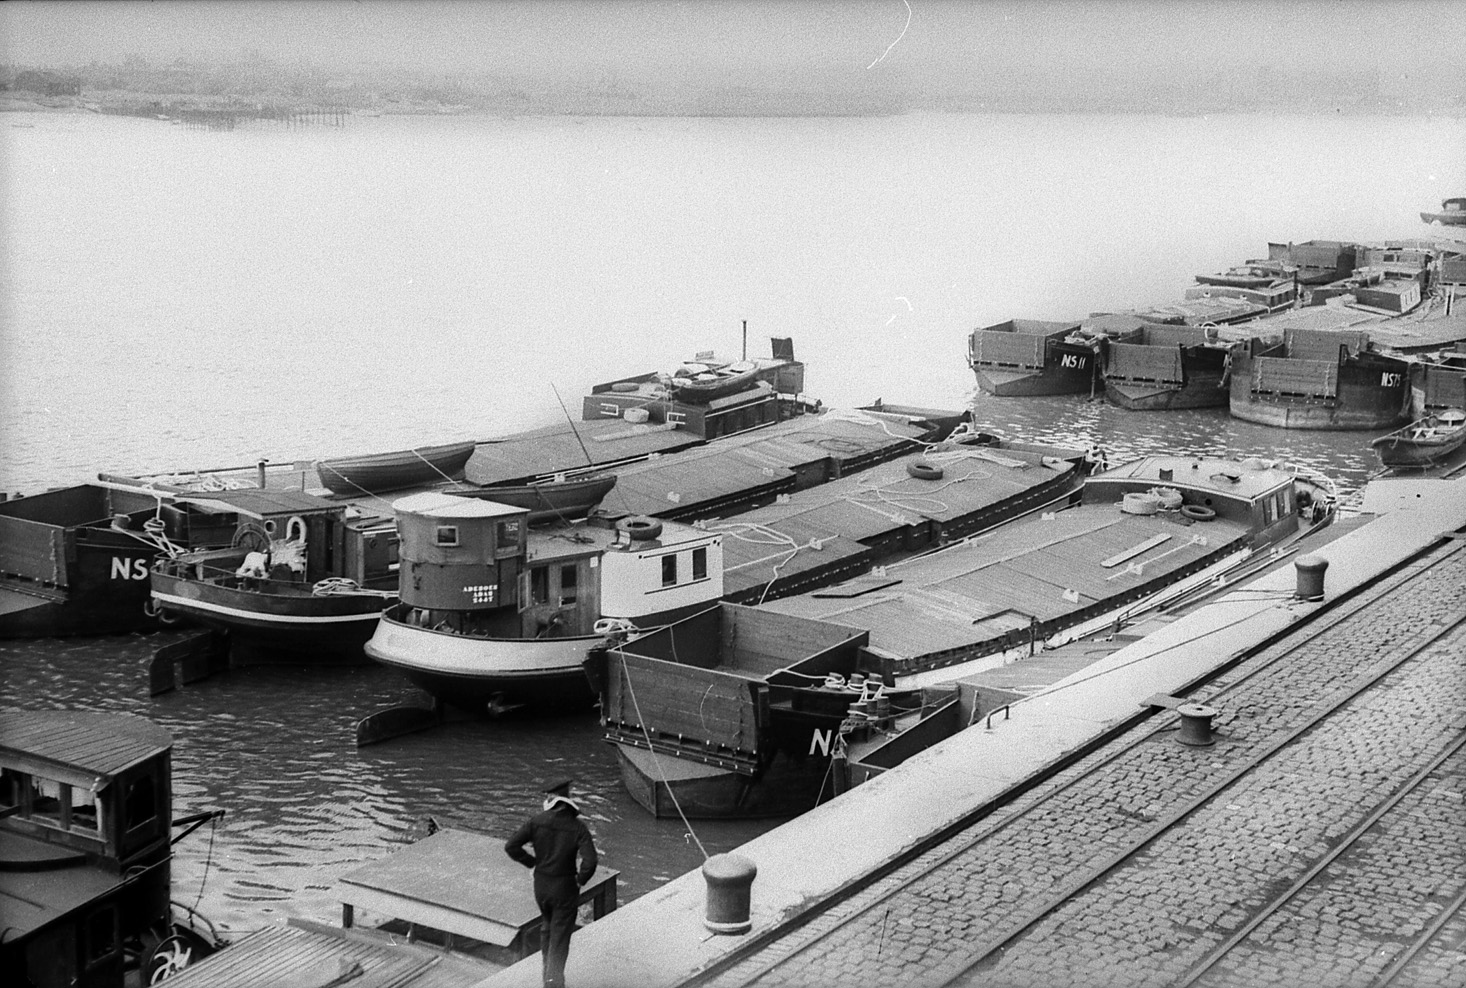 Invasion barges assembled at Wilhelmshaven to transport German soldiers across the Channel. The conversion of barges and other invasion vessels had absolute priority in shipyards in the summer of 1940, delaying the completion of U-boats and other warships. 